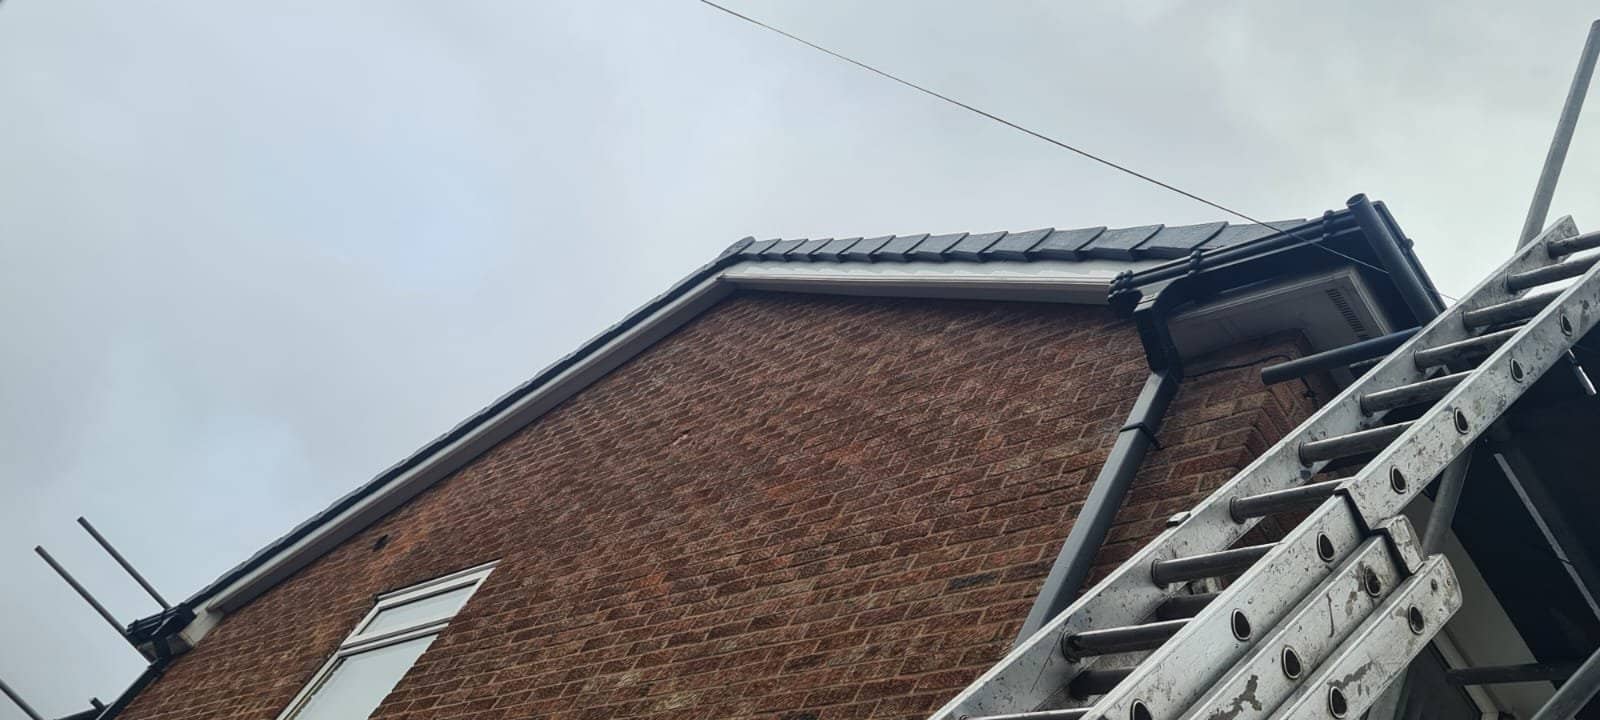 Dry verge on a house in Manchester installed by dm roofing